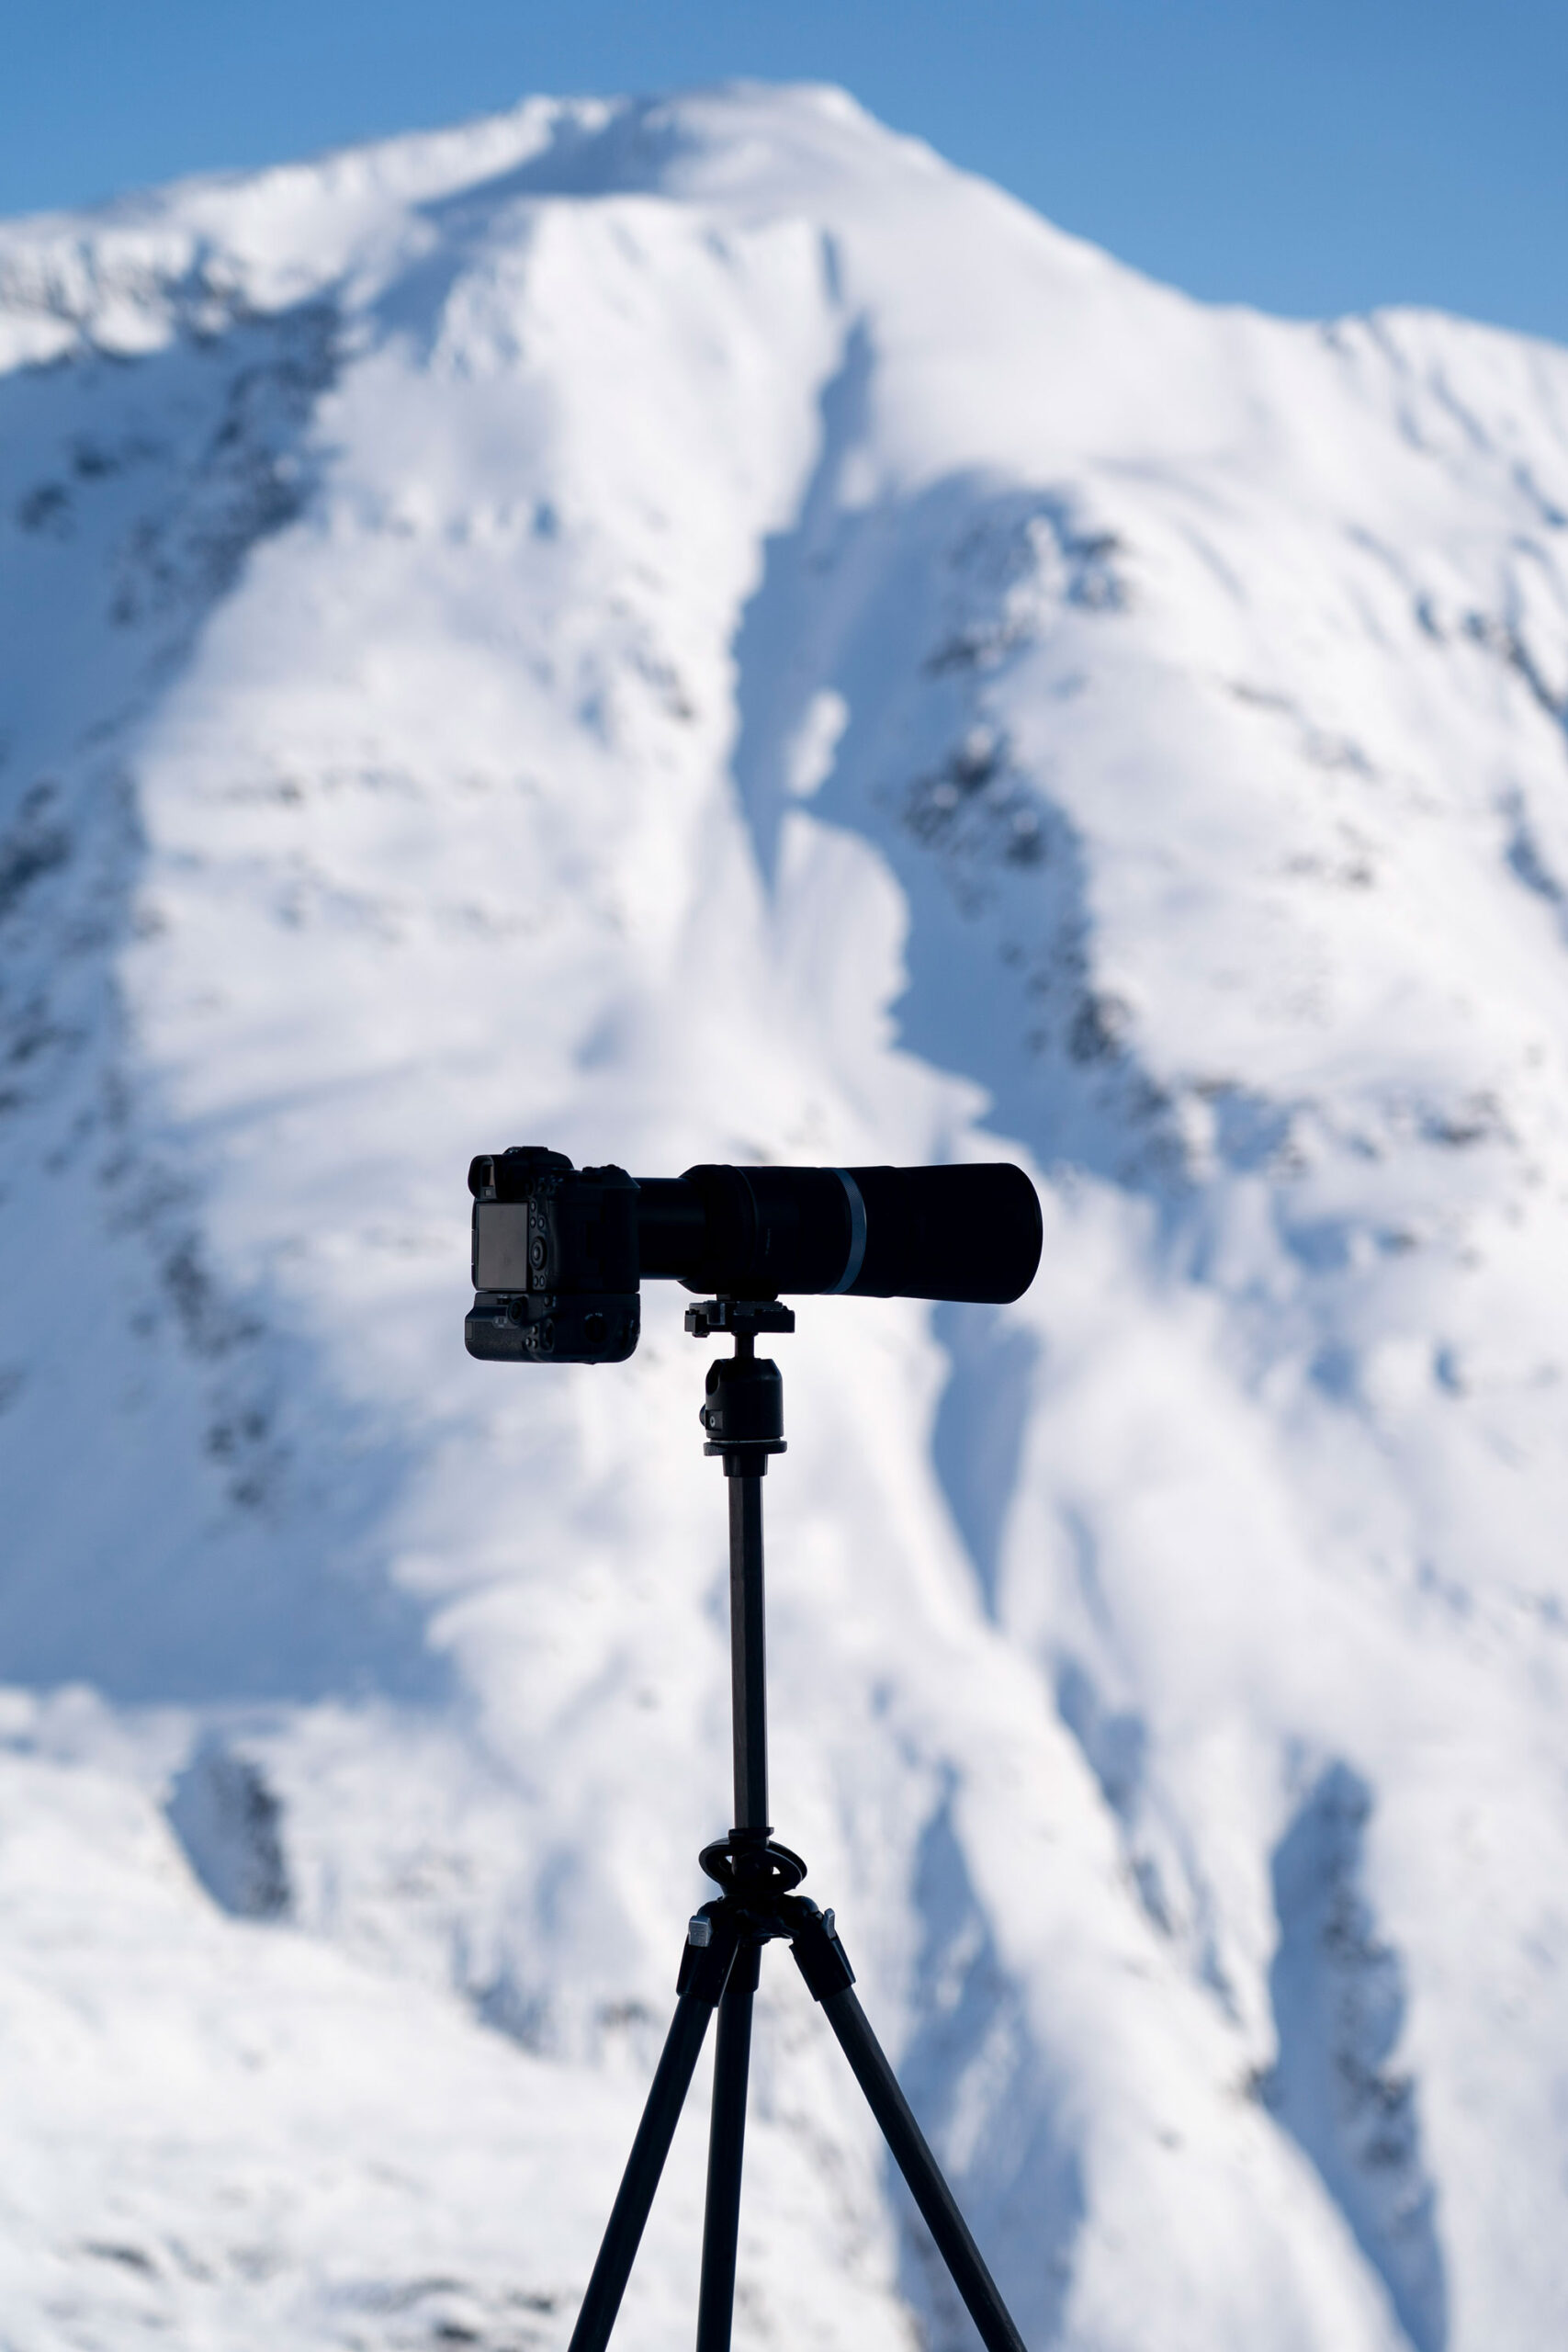 Camera on tripod with mountain in background